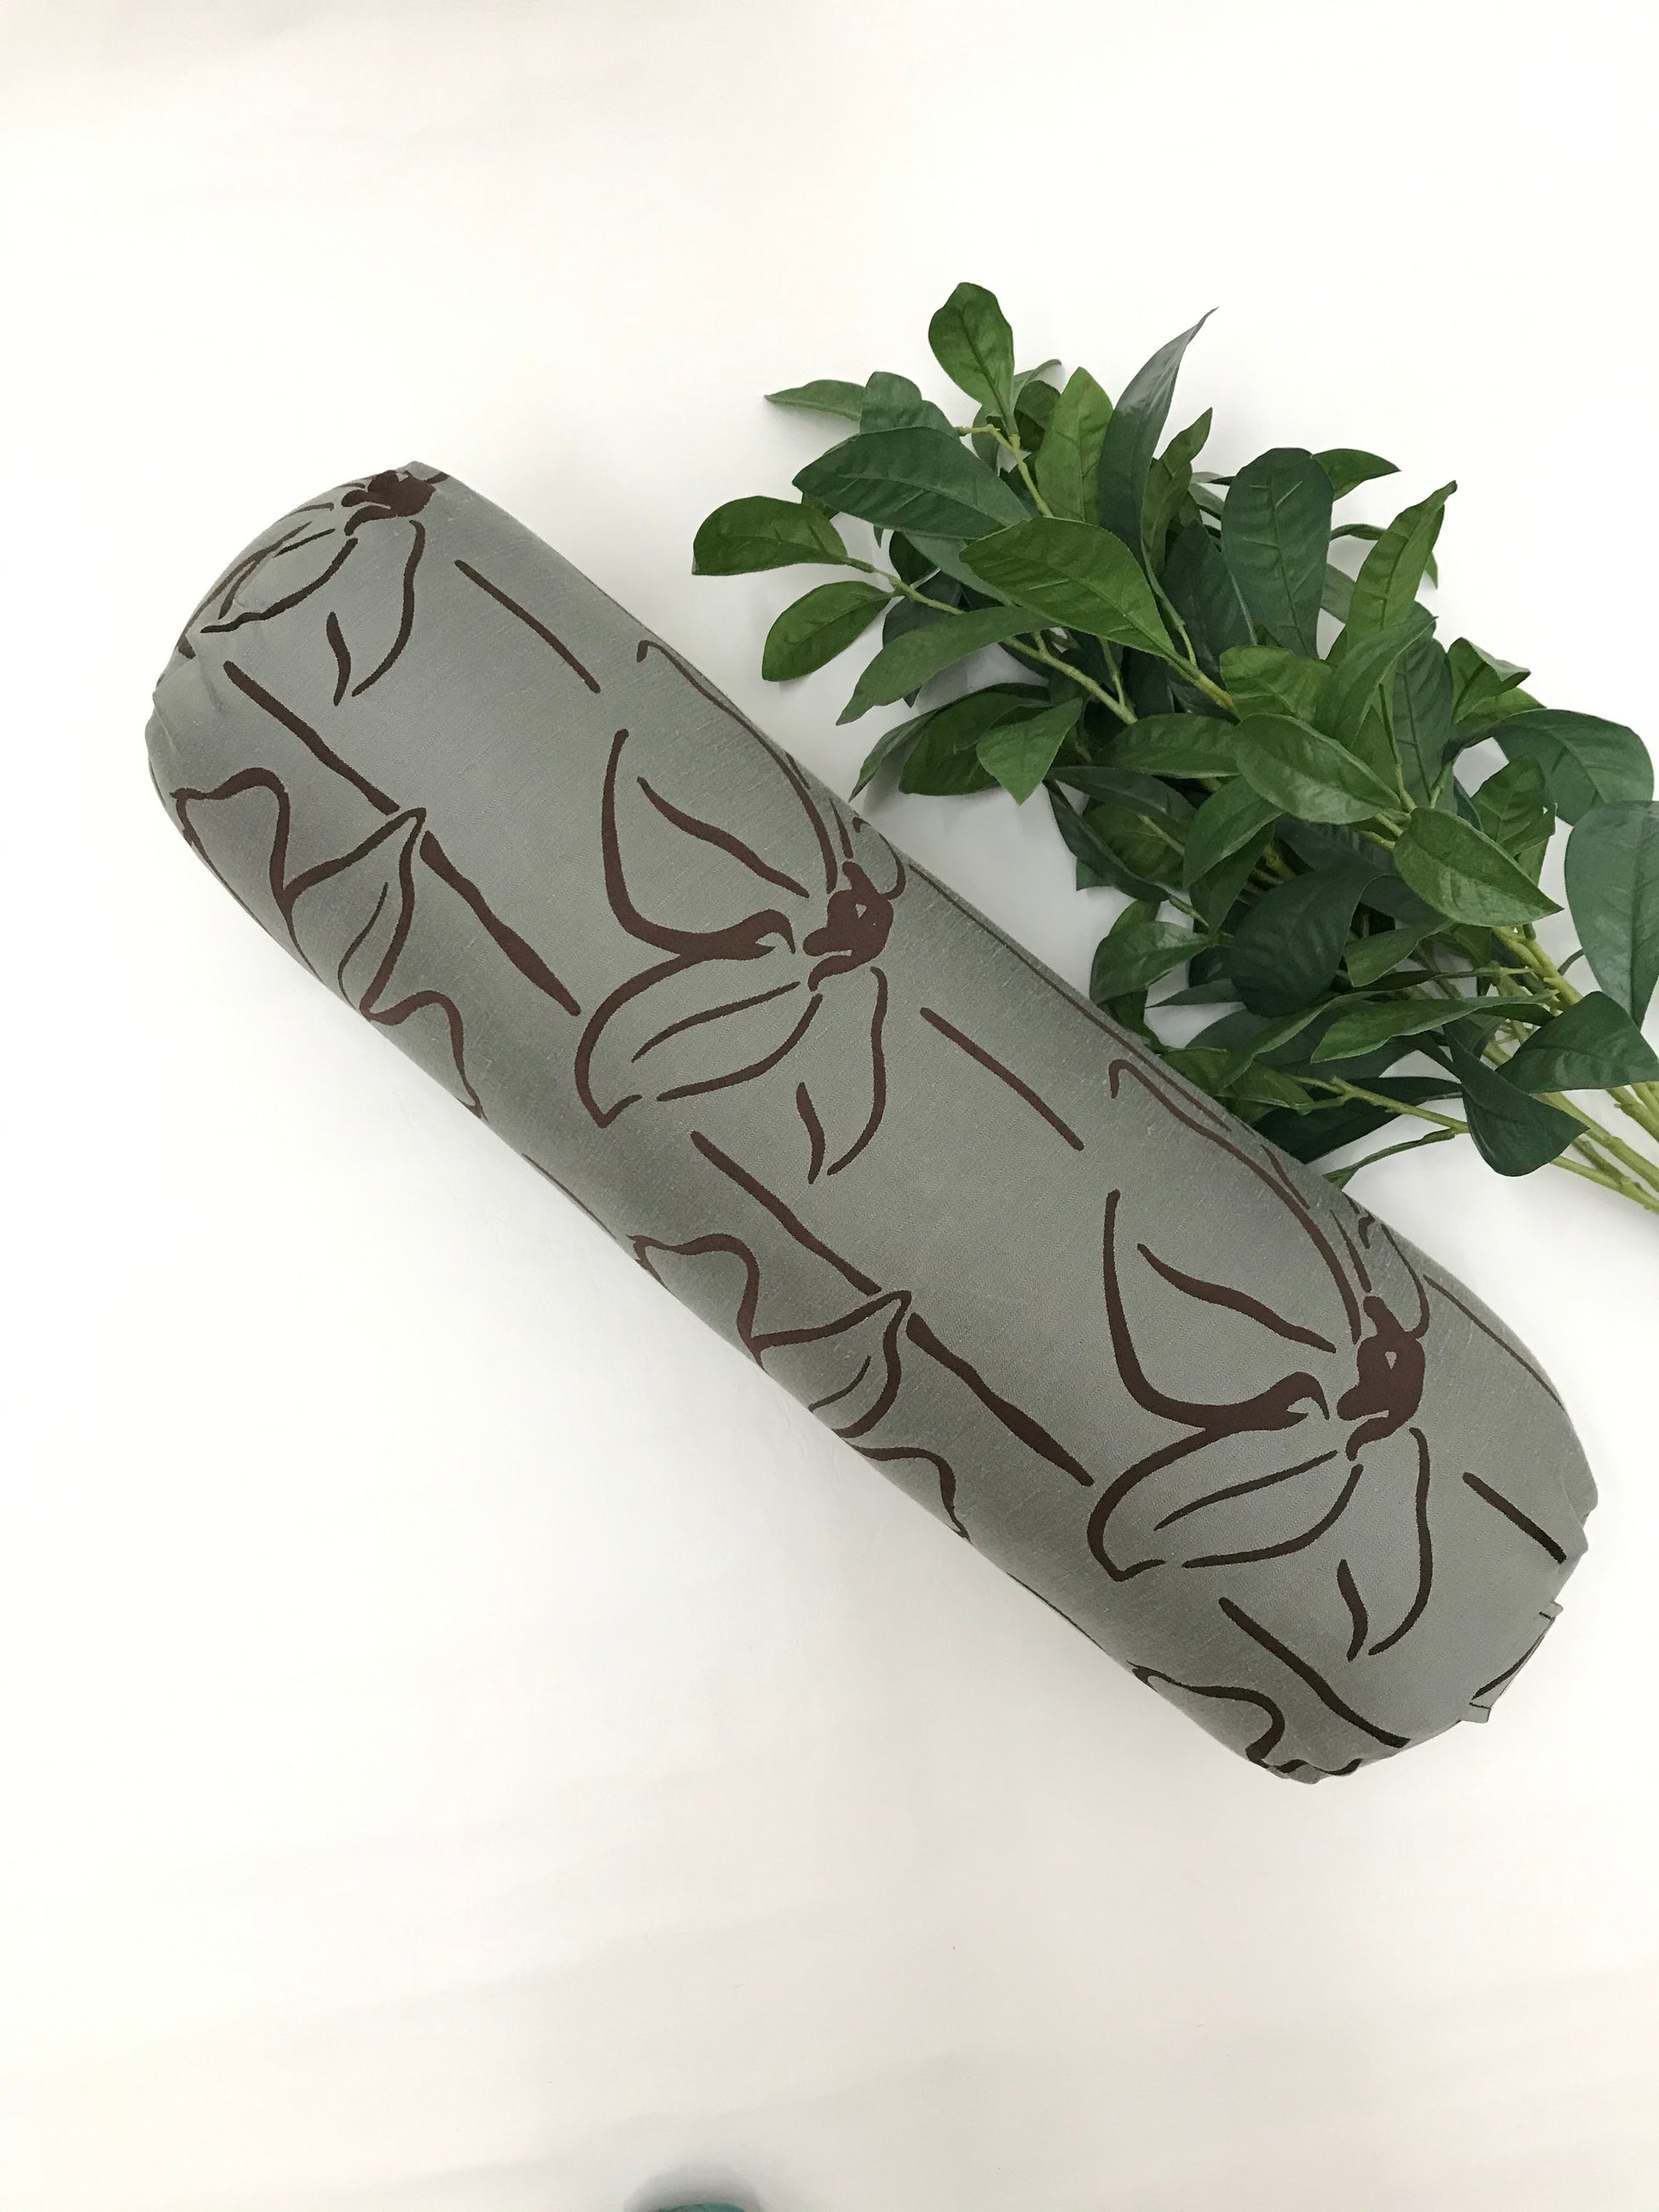 Round yoga bolster in textured linen fabric, line floral graphic in sage and brown fabric. Allergy conscious fill with removeable cover. Made in Canada by My Yoga Room Elements